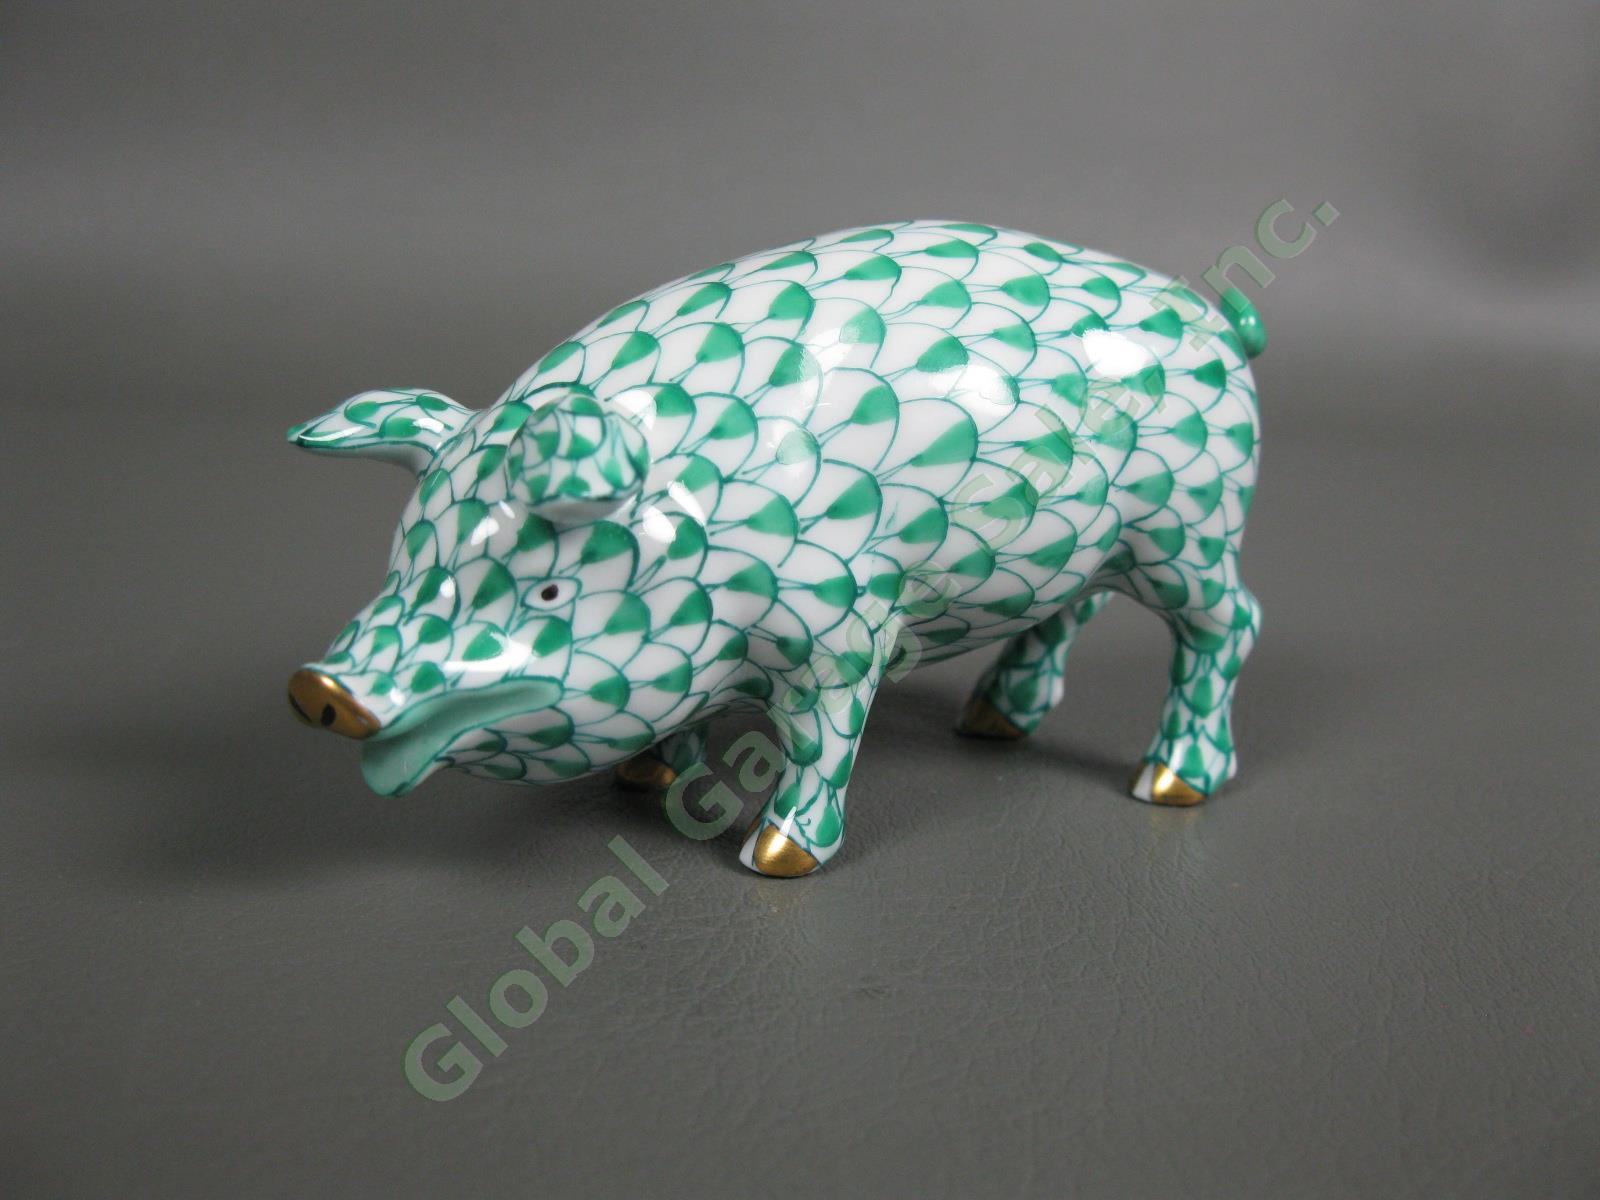 Herend Open Mouth Green Fishnet Pig 24k Gold Accents 15301 Farmyard Figurine NR